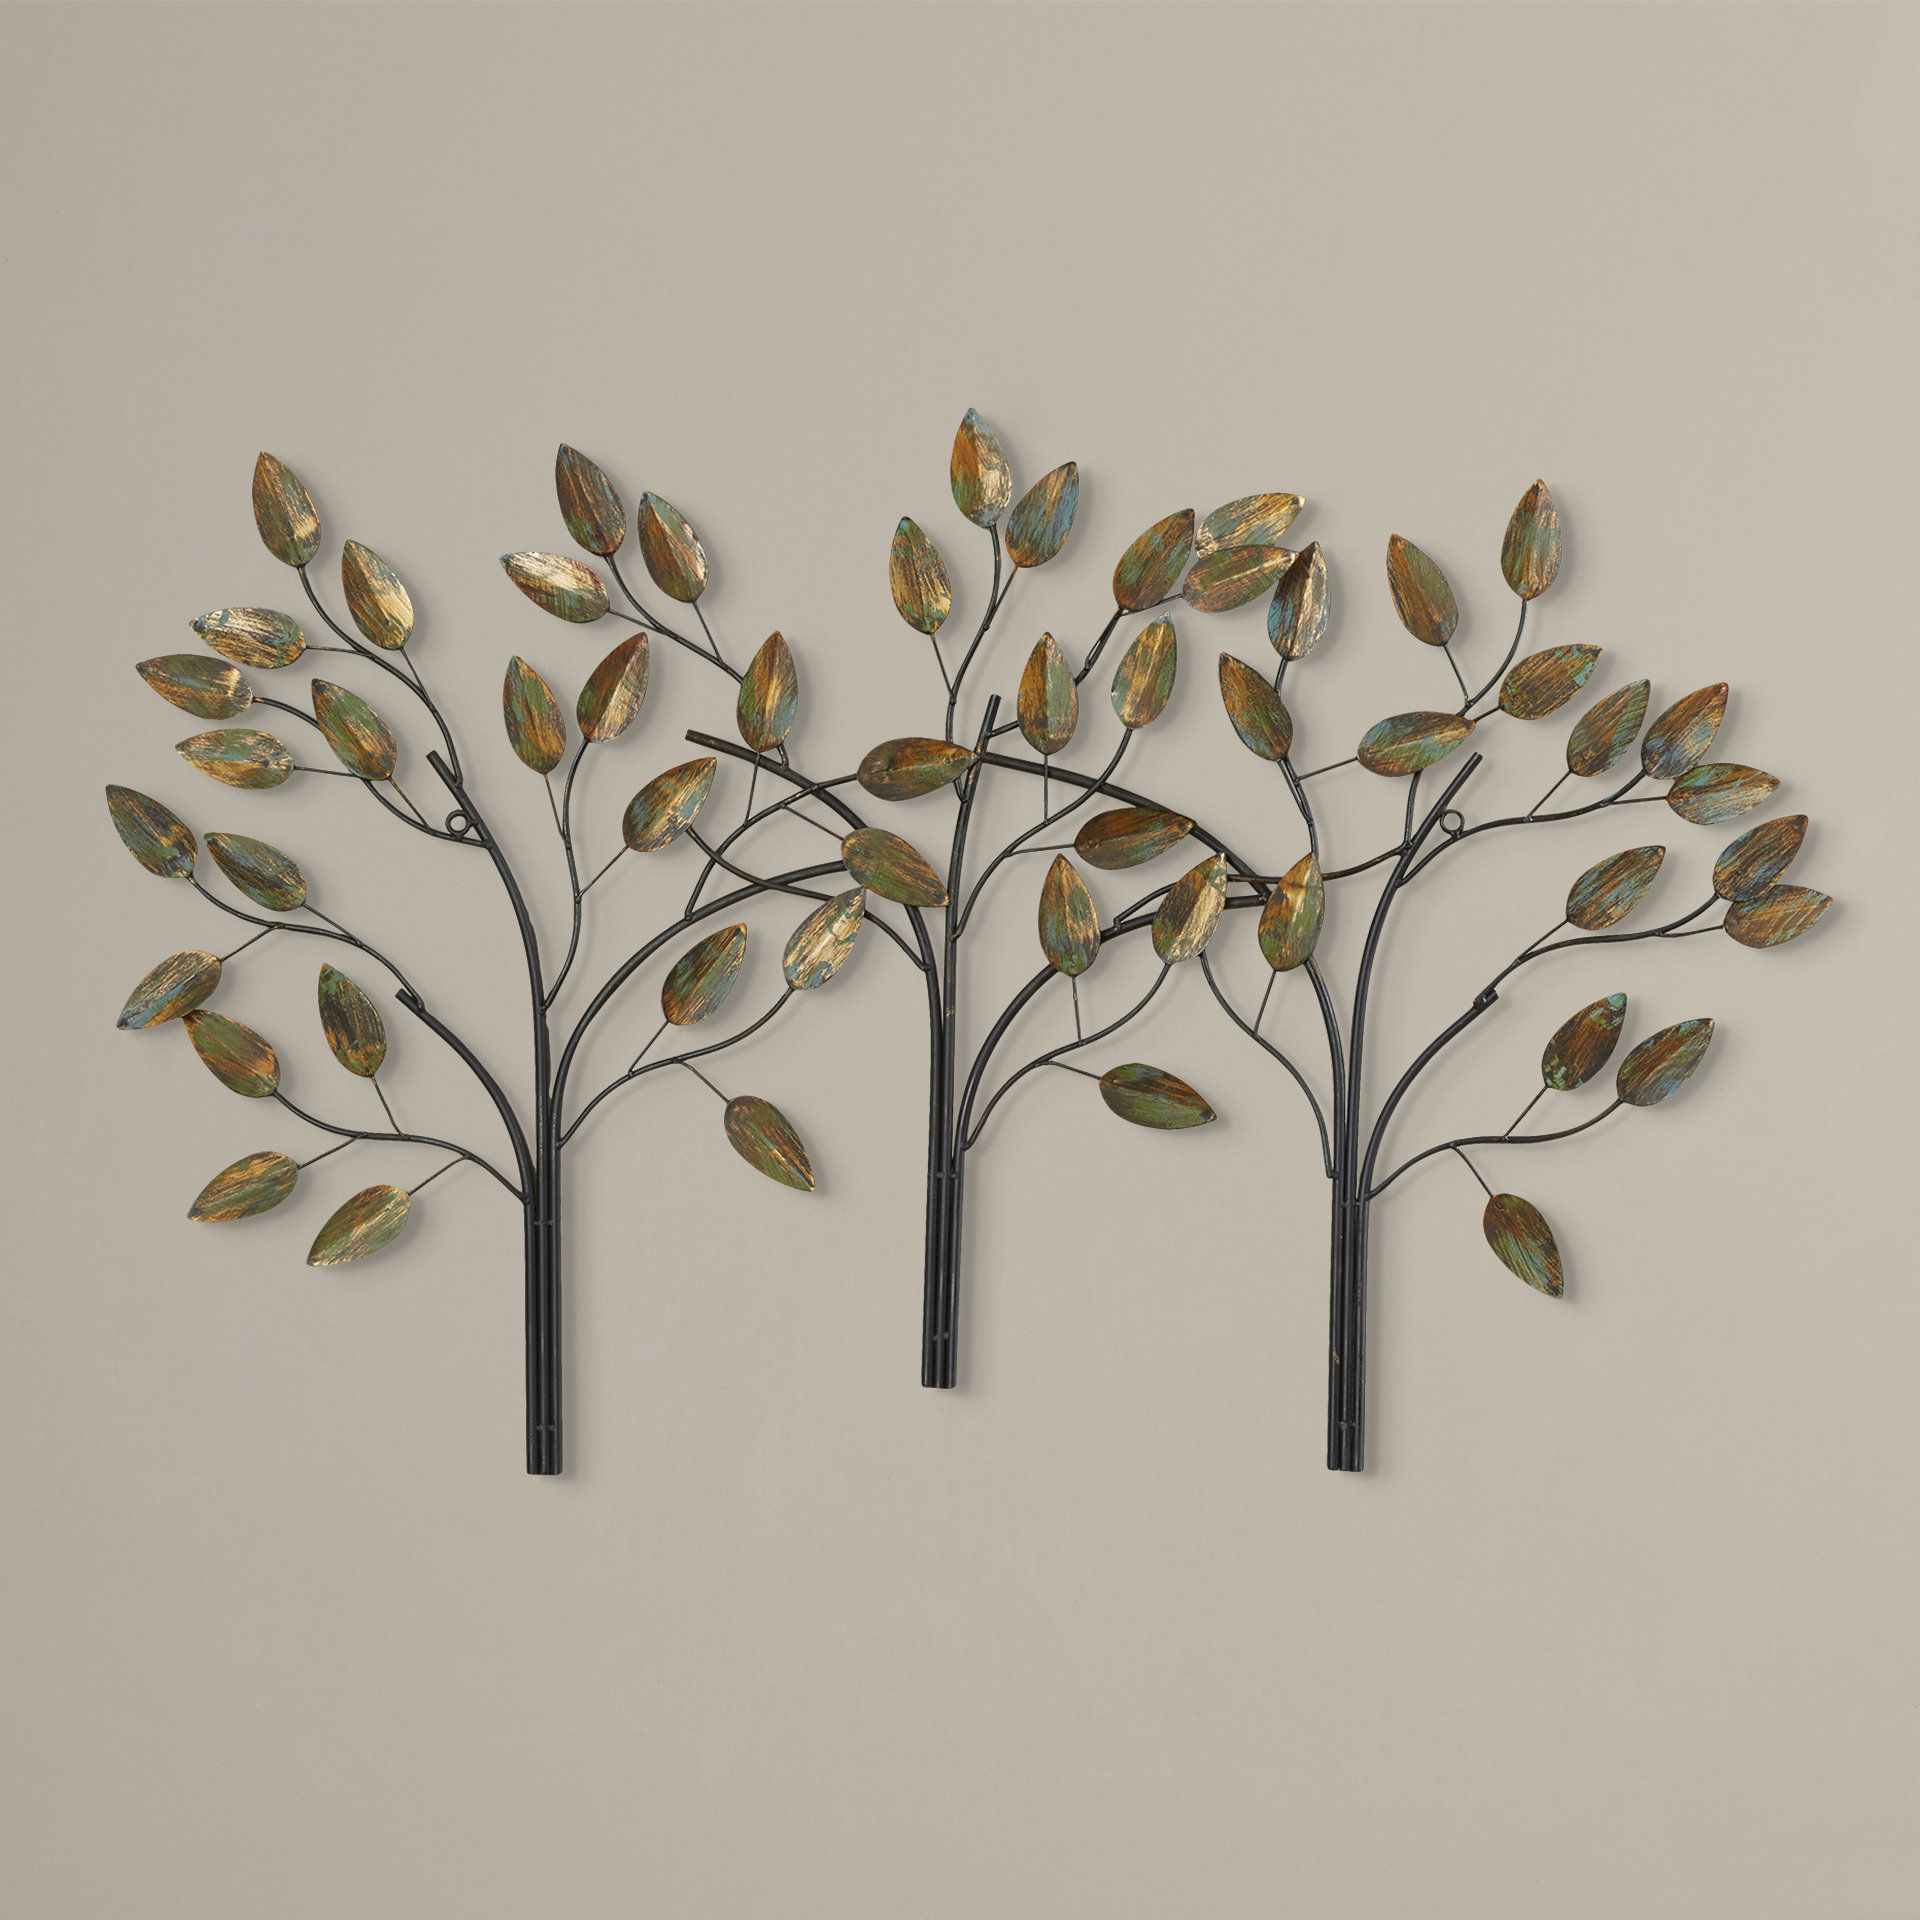 Charlton Home Desford Leaf Wall Décor & Reviews | Wayfair Inside Wall Decor By Charlton Home (View 4 of 30)